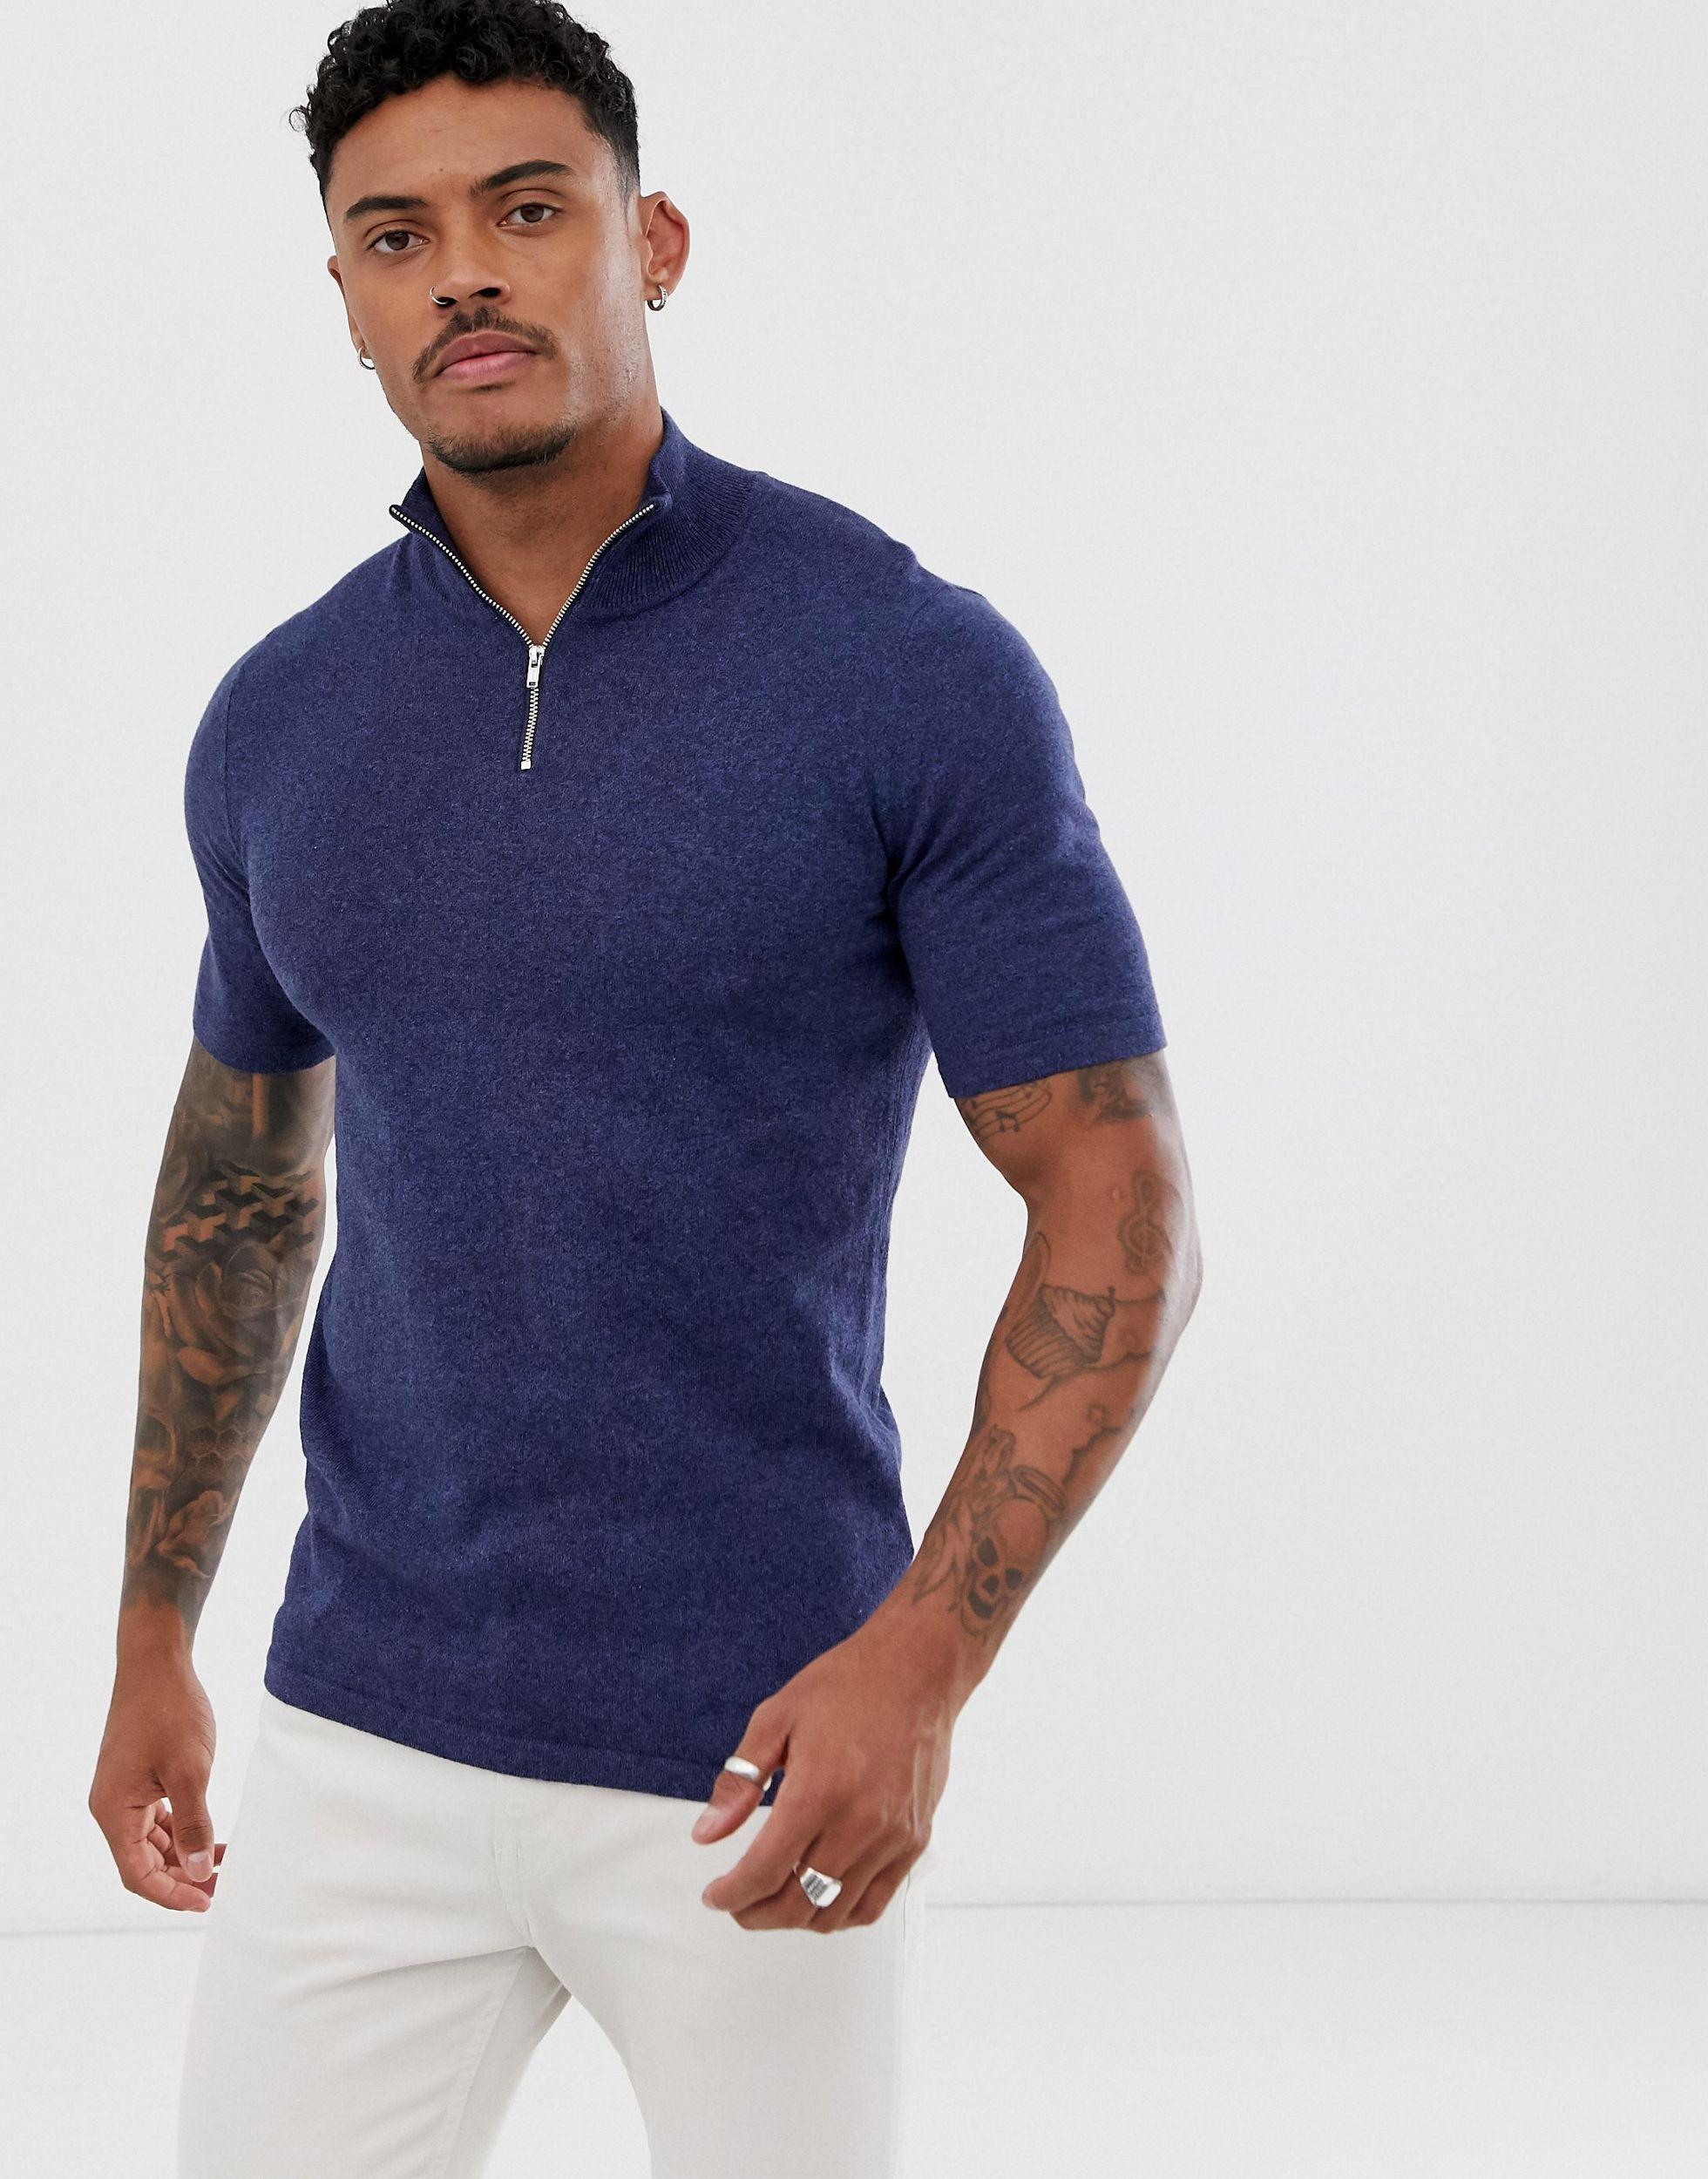 ASOS Cotton Knitted Half Zip T-shirt in Navy (Blue) for Men - Lyst